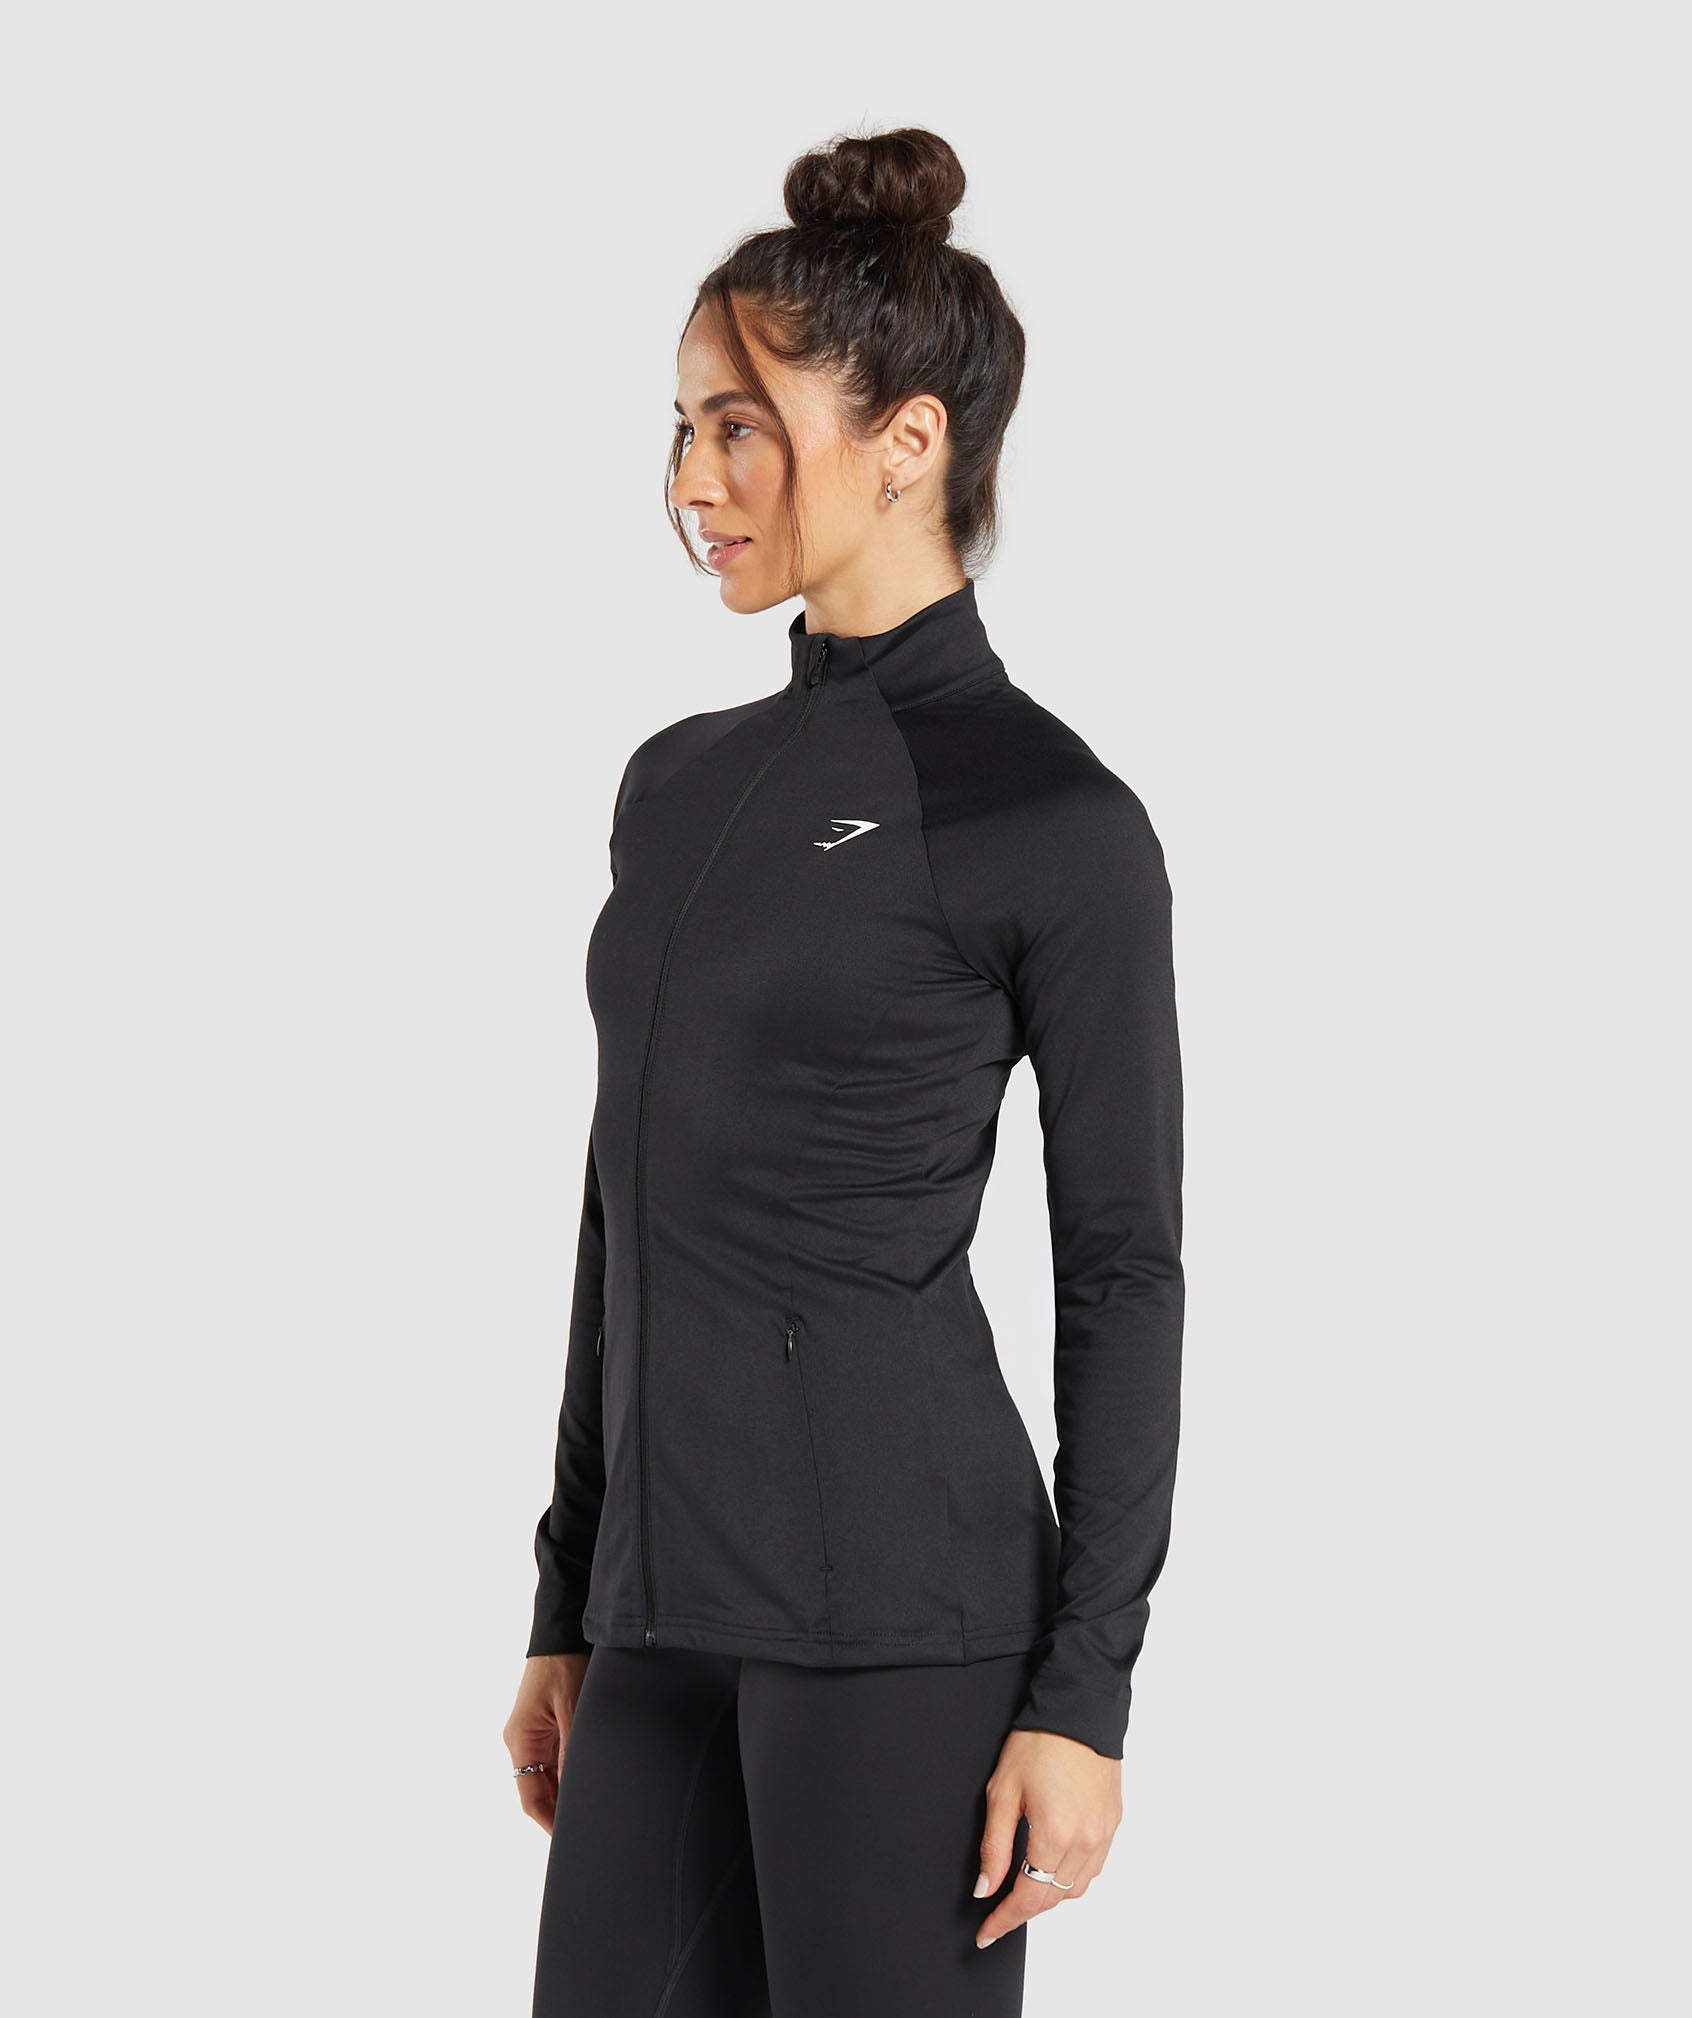 Training Jacket in Black - view 3